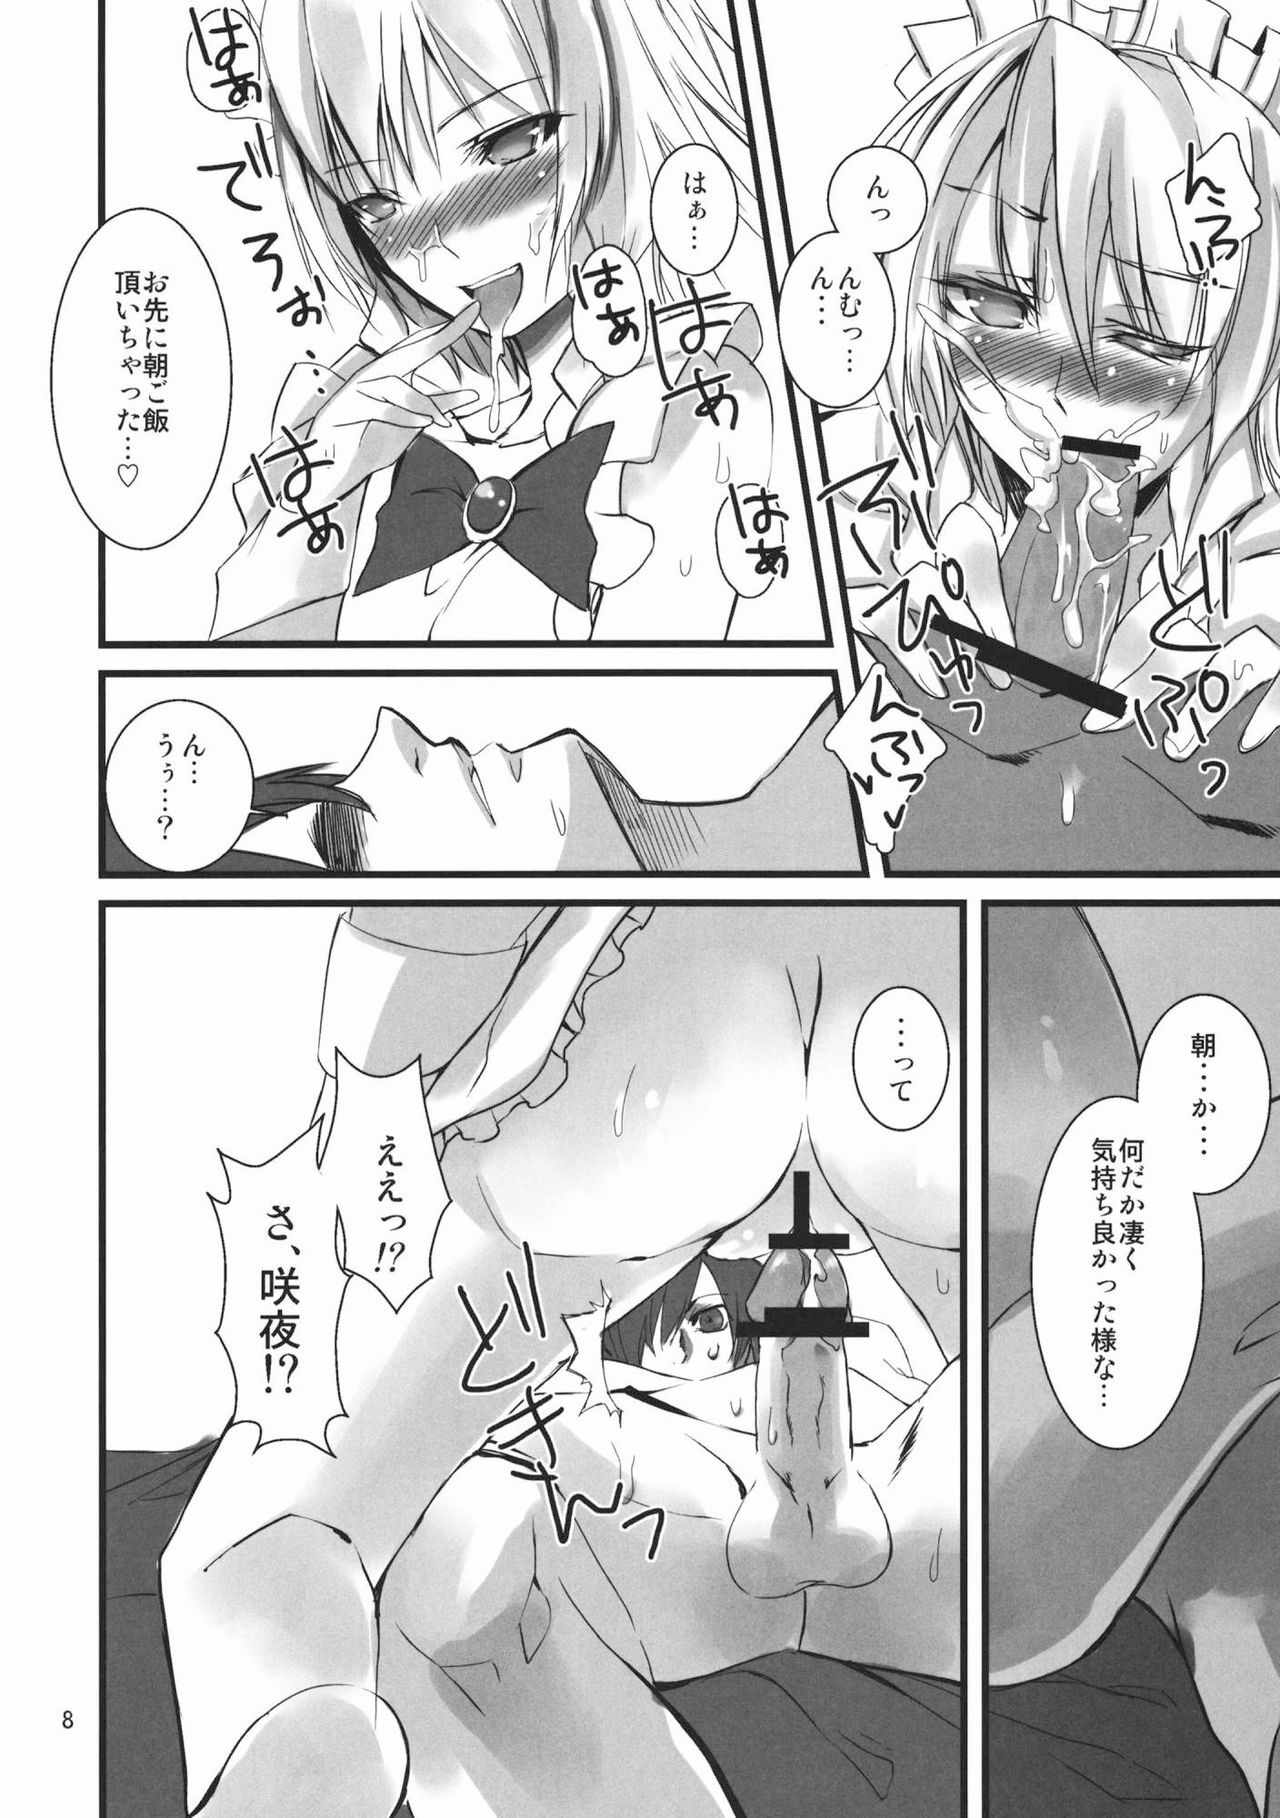 (Touhou Kamuisai 4) [KOTI (A Toshi)] 1 day my maid (Touhou Project) page 8 full